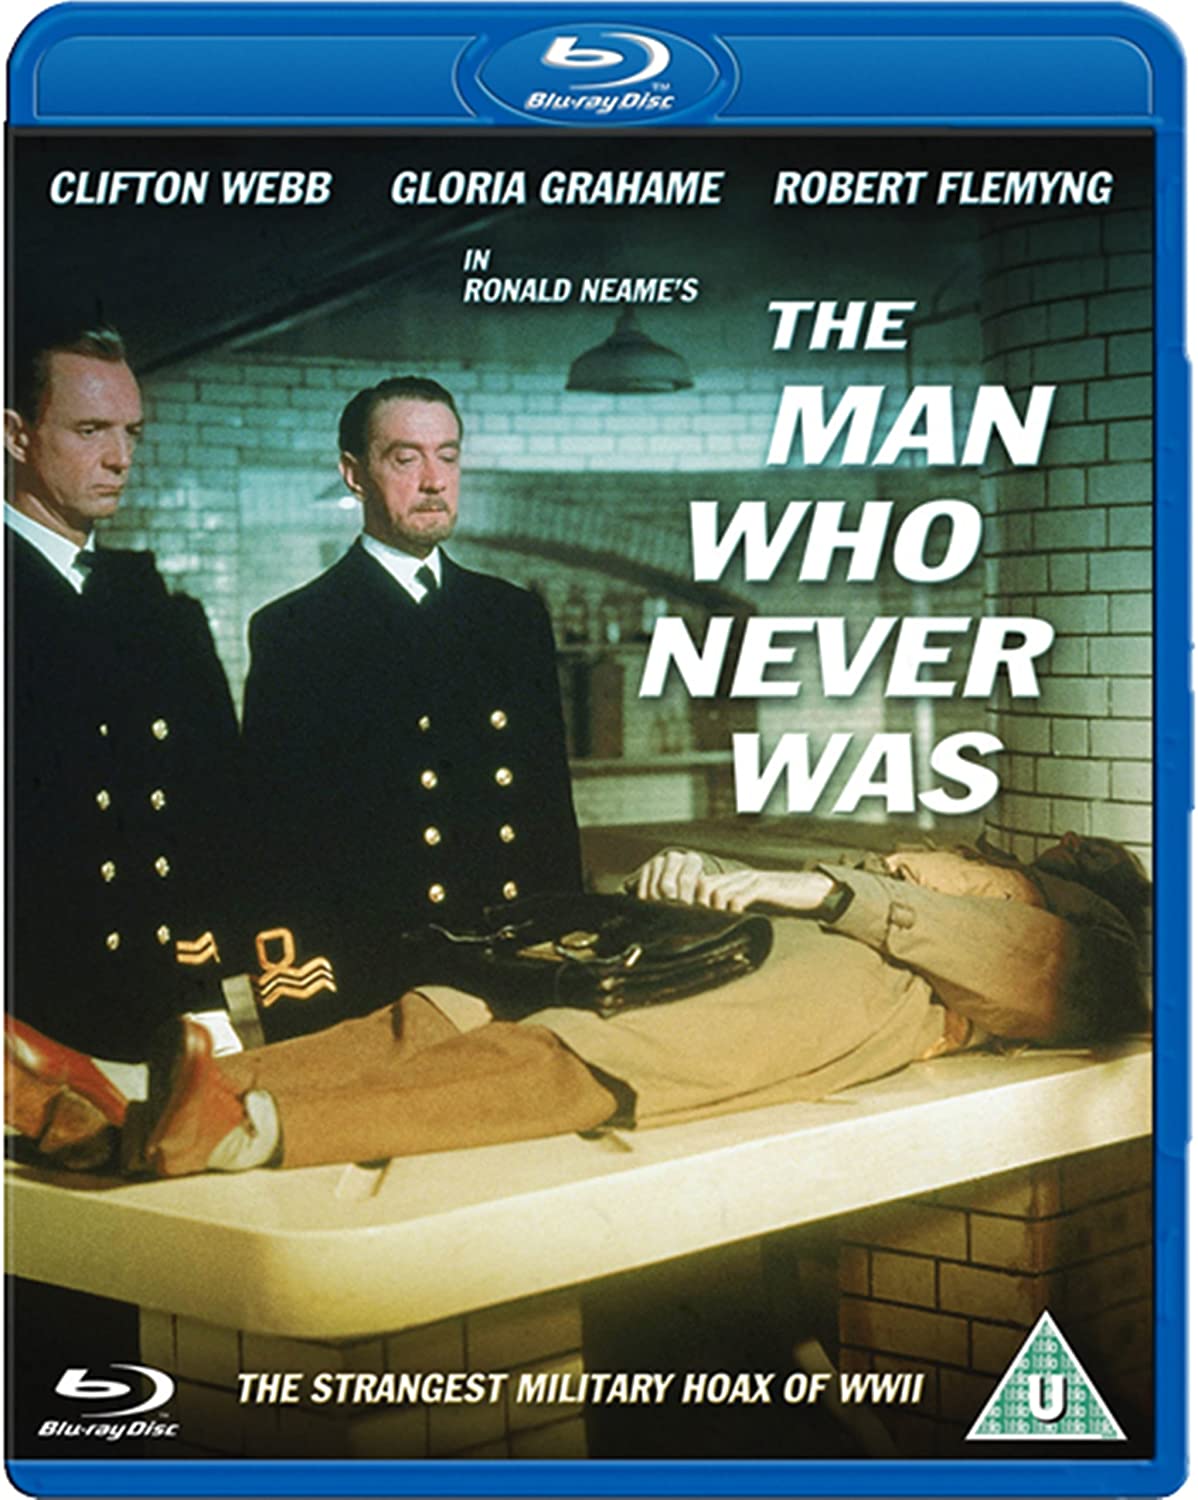 The Man Who Never Was (1956), starring Clifton Webb, Gloria Grahame, Robert Flemyng